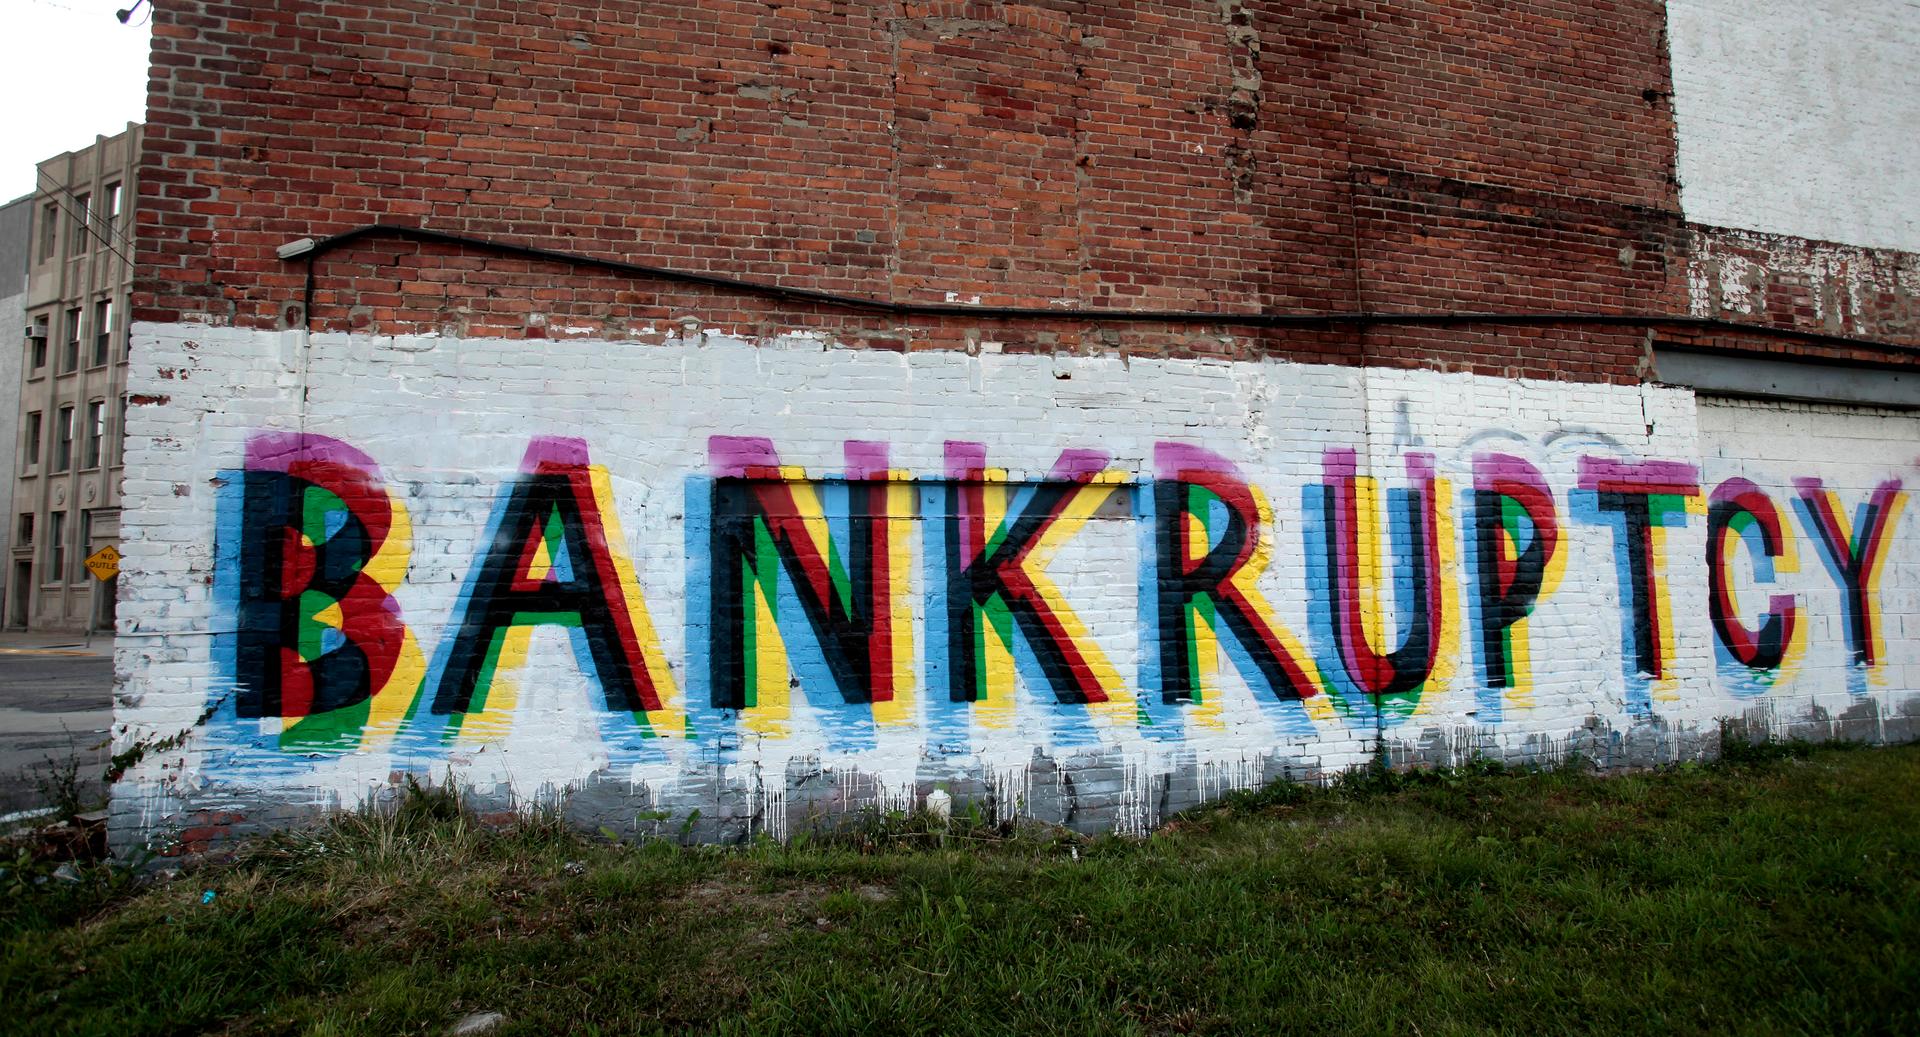 The word 'Bankruptcy' is seen painted on the side of a vacant building by street artists as a statement on the financial affairs of the city on Grand River Avenue in Detroit.